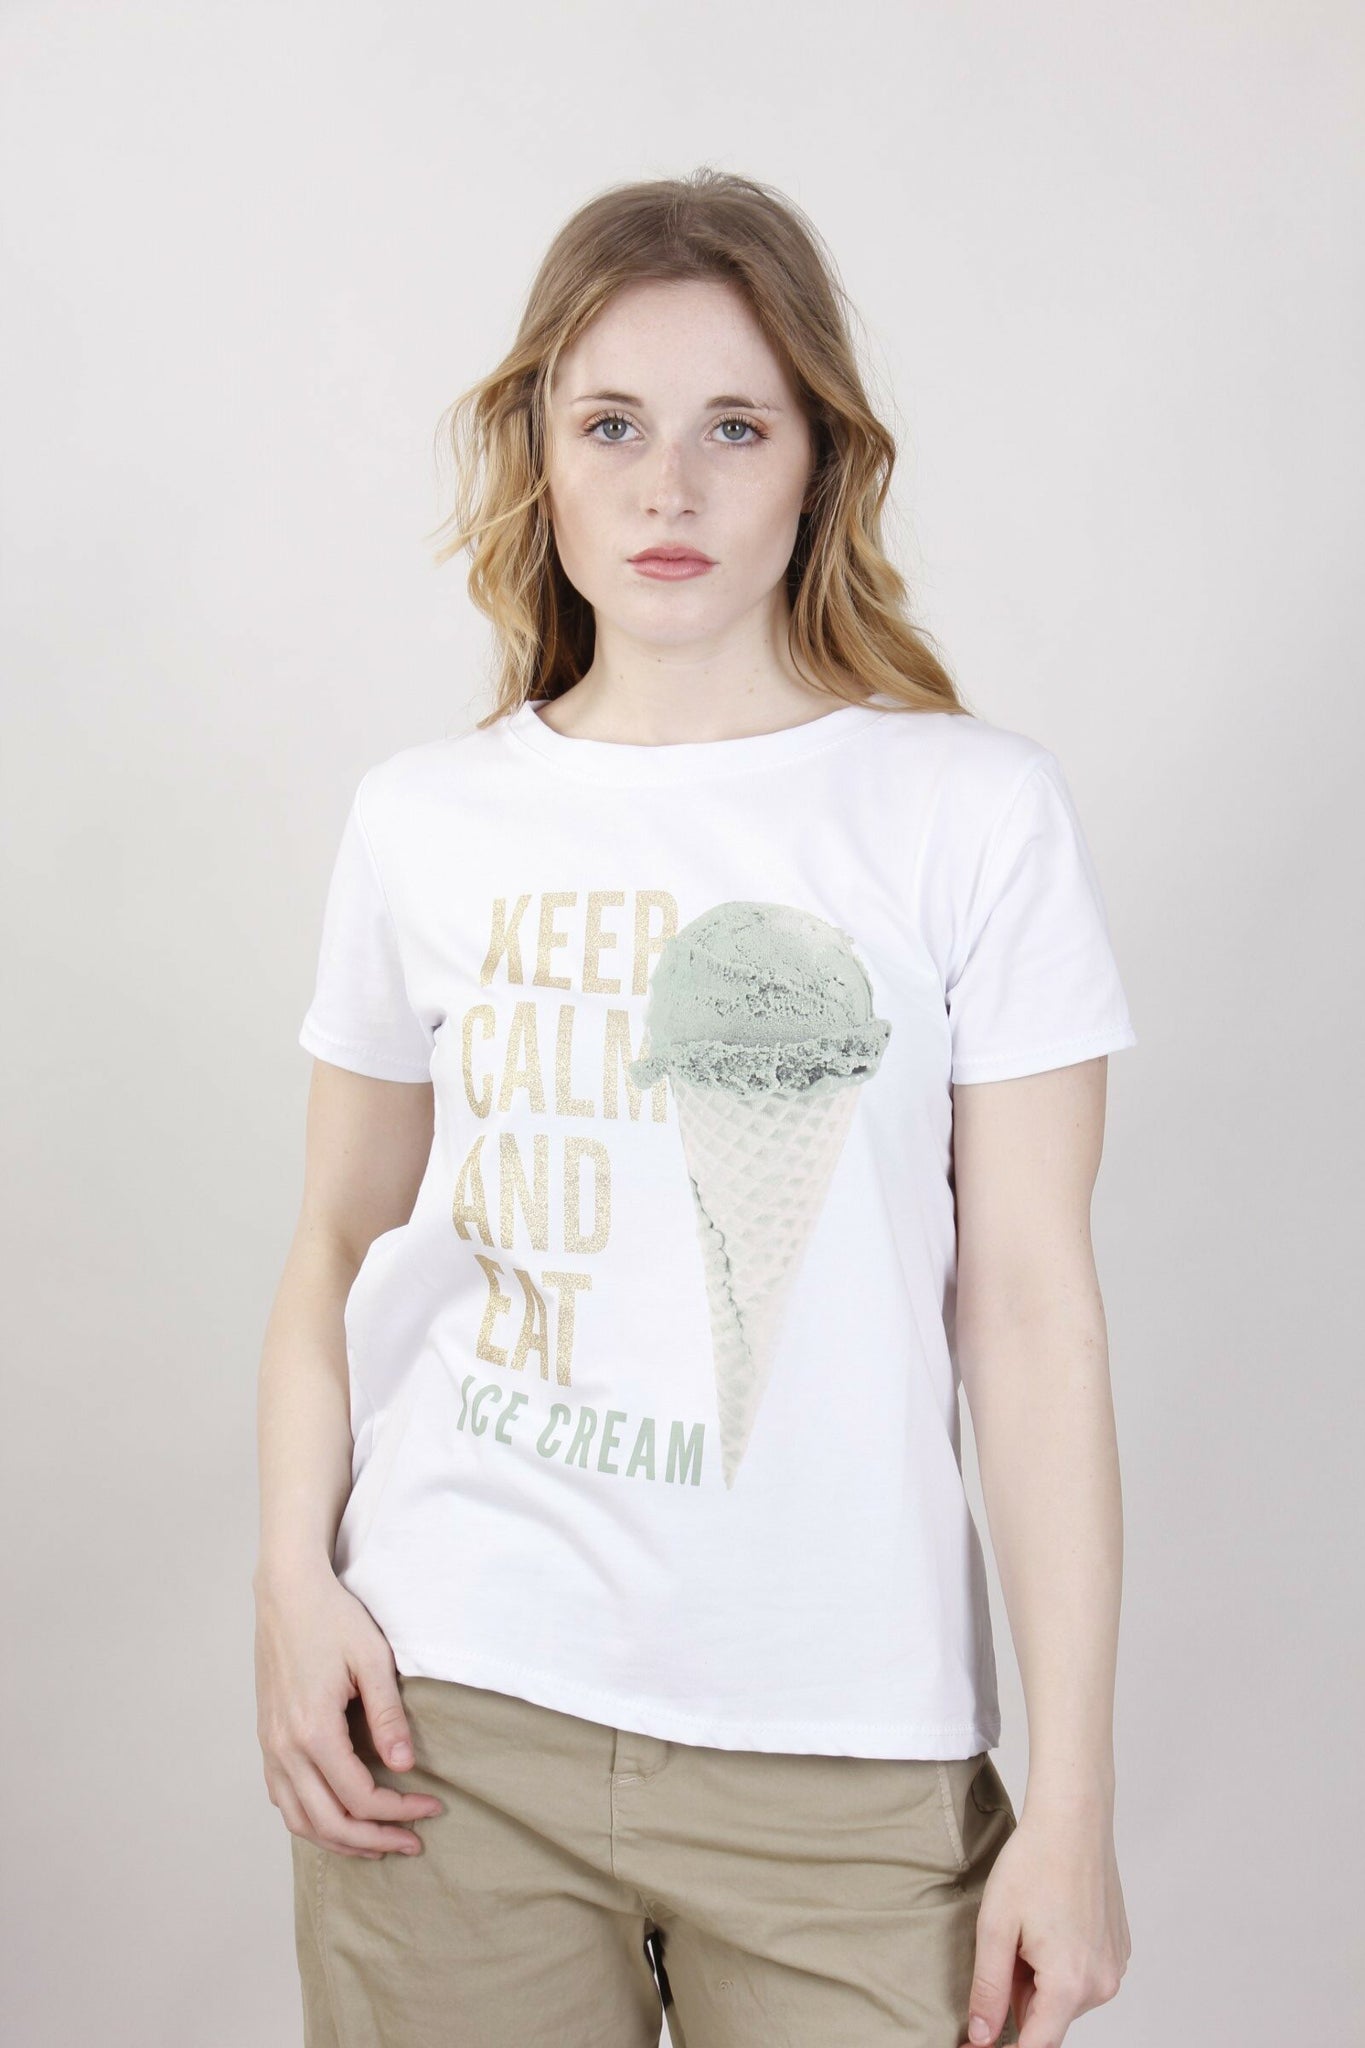 White t-shirt with mint ice cream